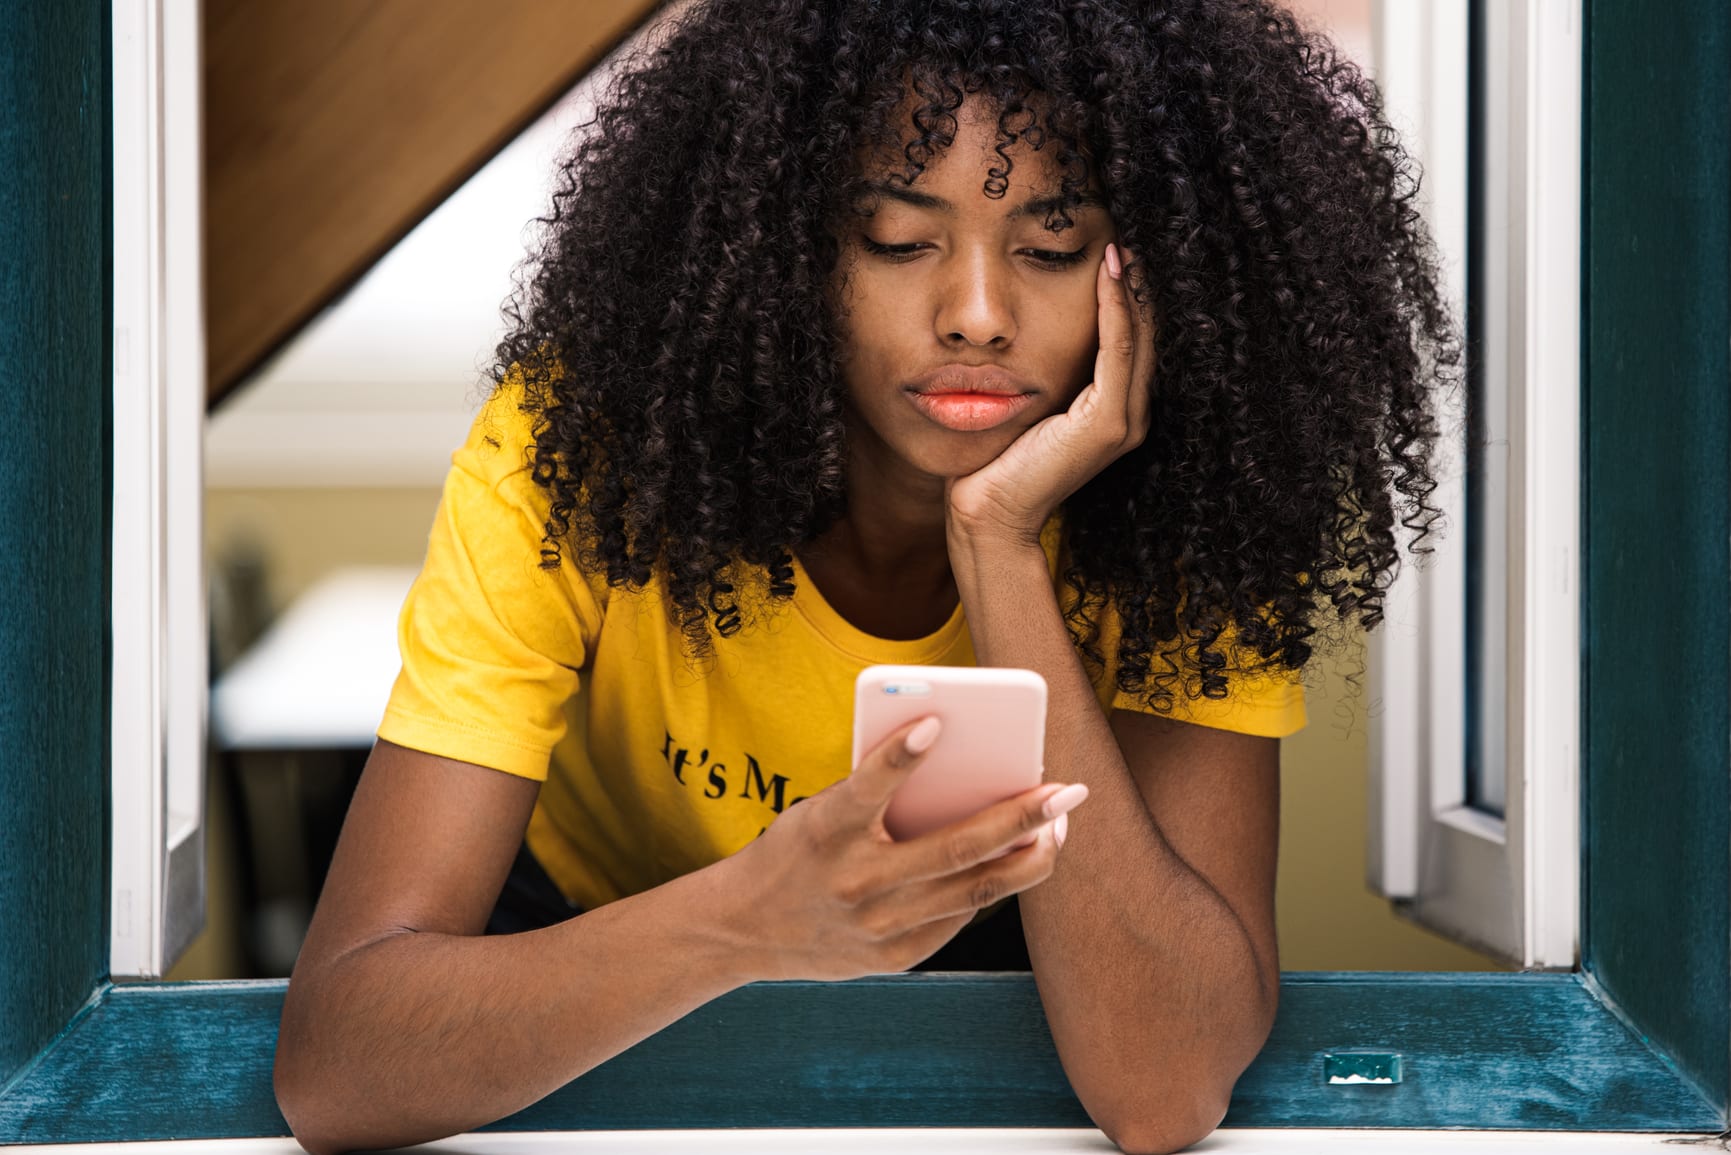 Pensive African American female with dark curly hair in bright yellow shirt looking out window and thinking while using smartphone in modern apartment